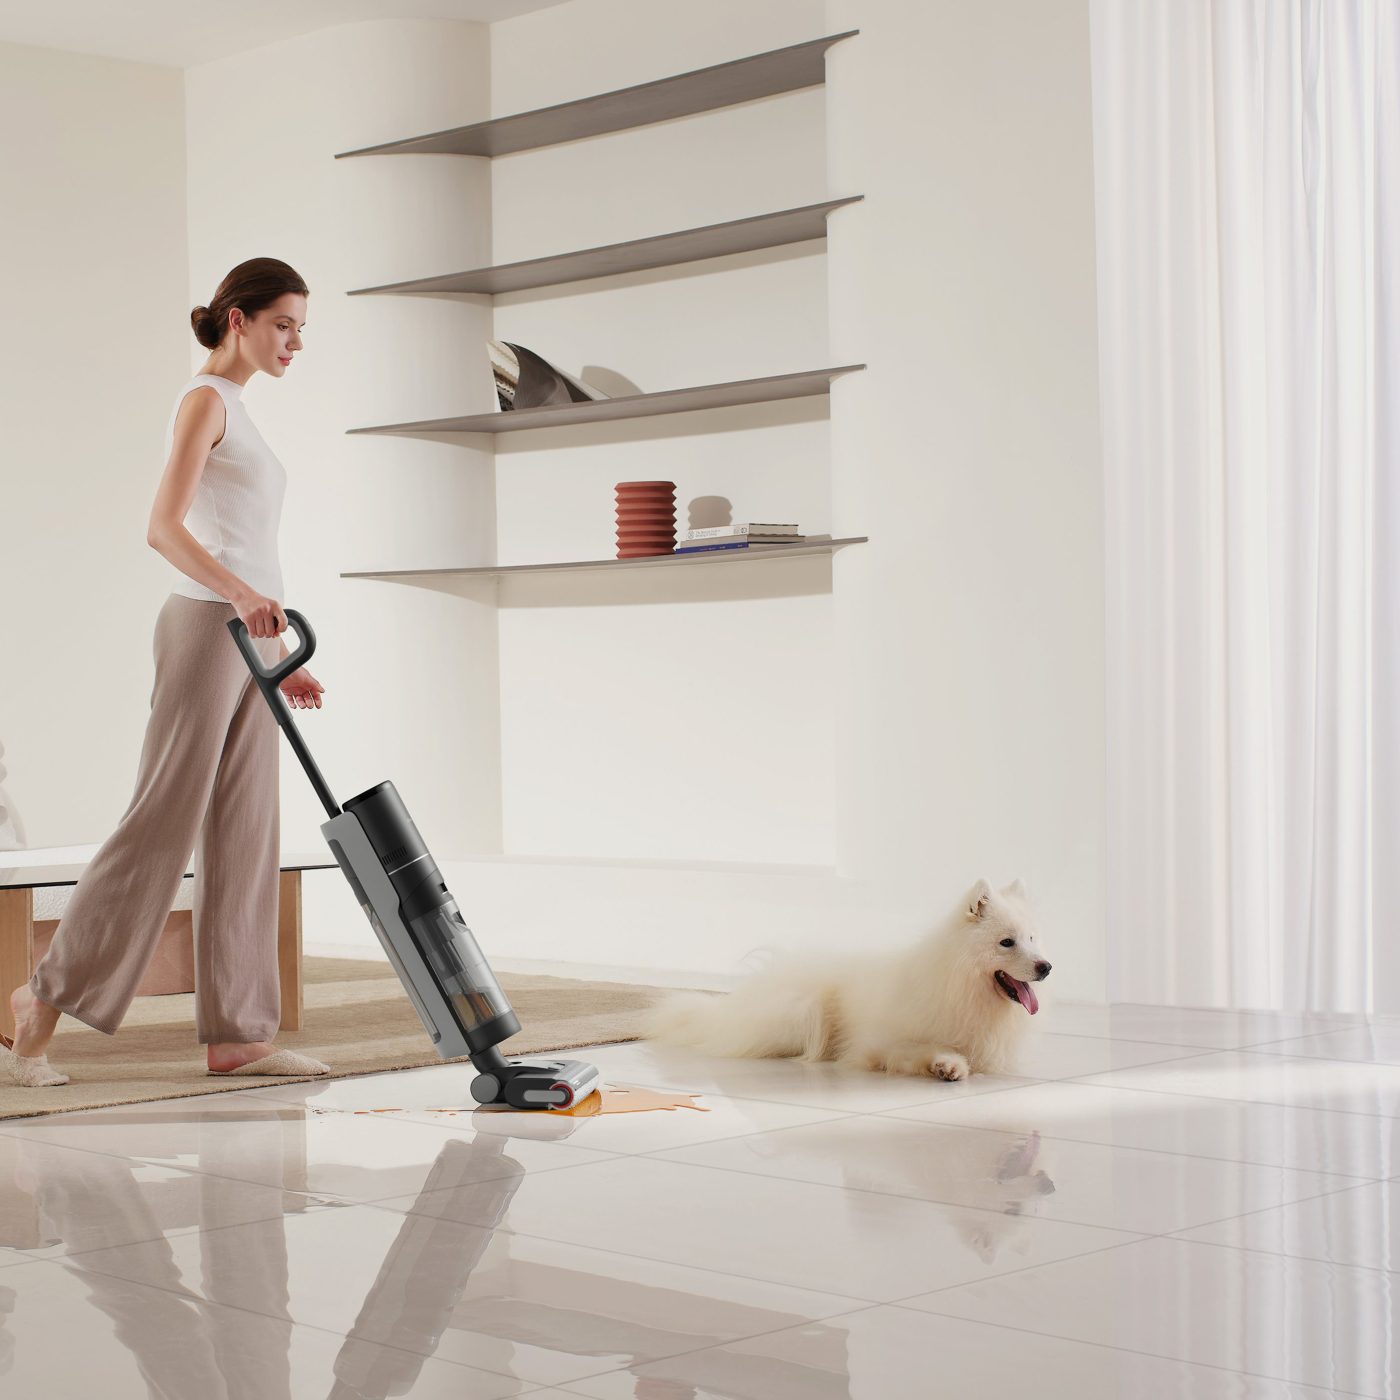 Dreame H12 Pro/Dual Wet and Dry Cordless Vacuum Cleaner 2 Edge